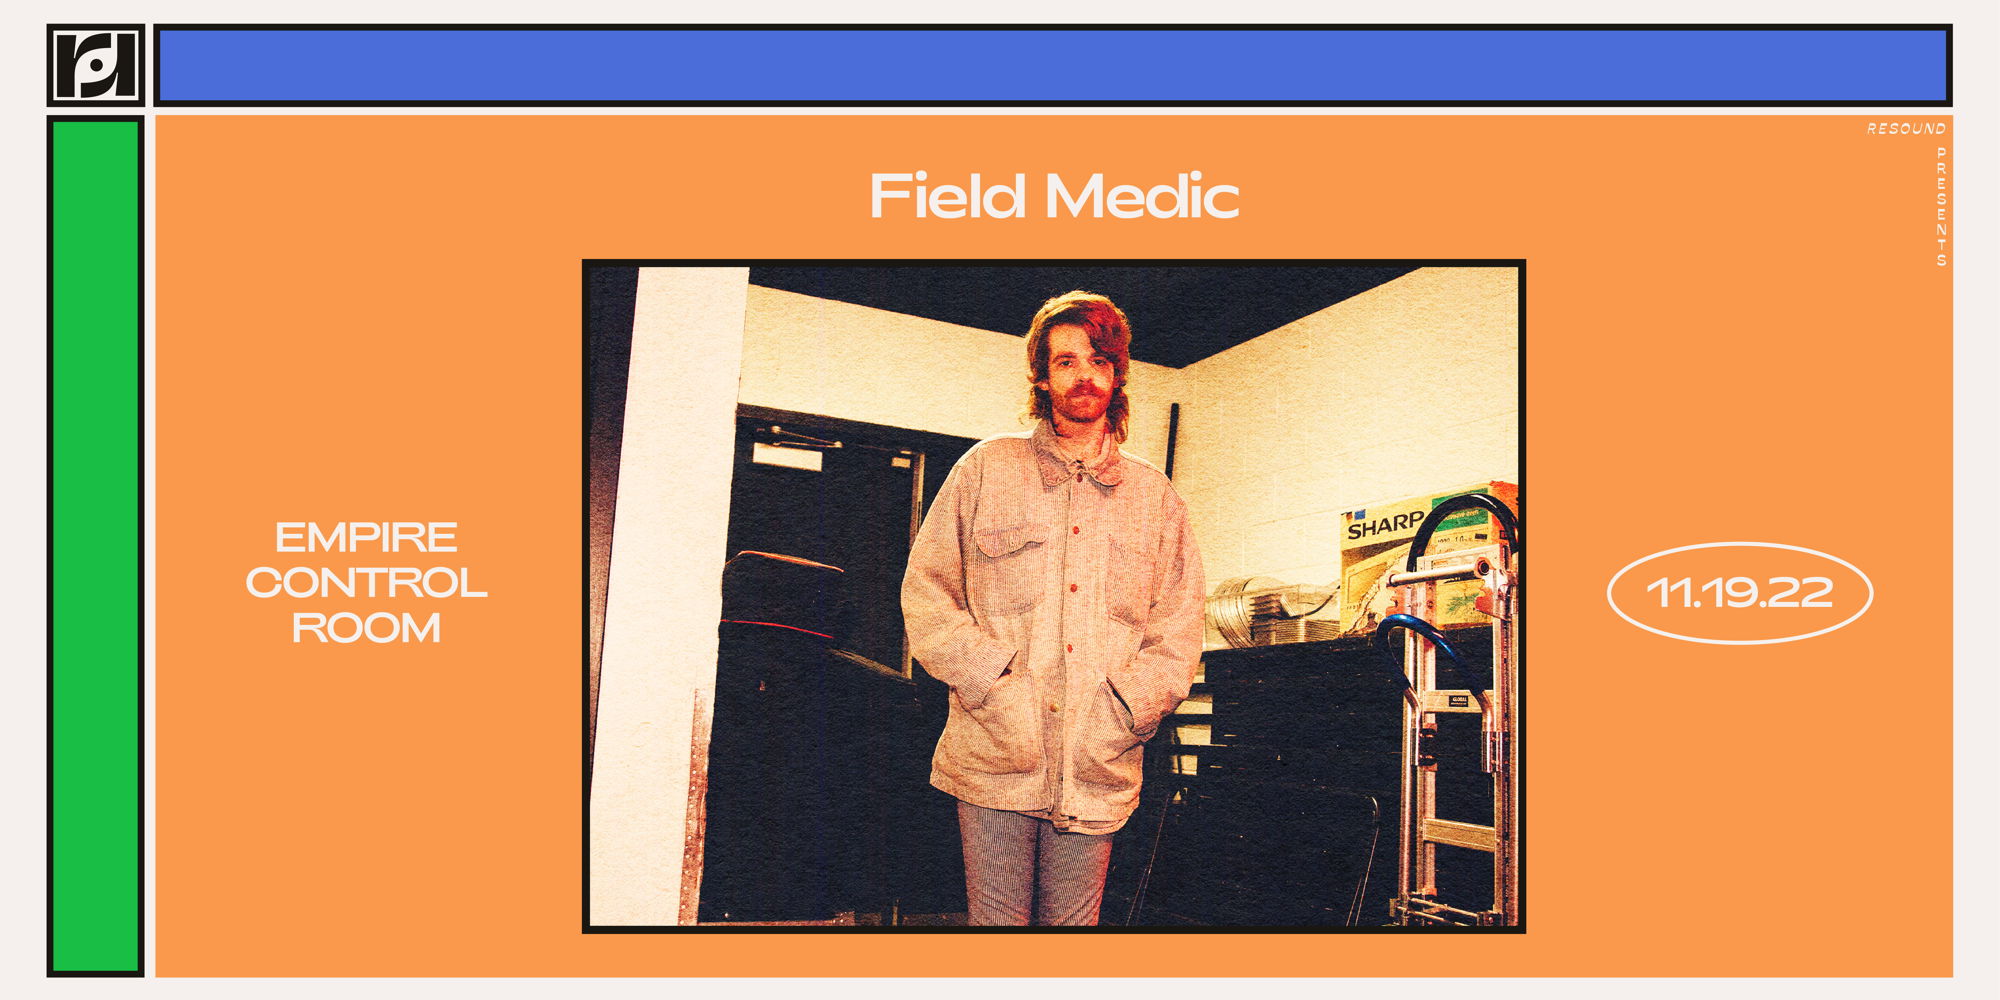 Resound Presents: Field Medic at Empire Control Room - 11/19 promotional image